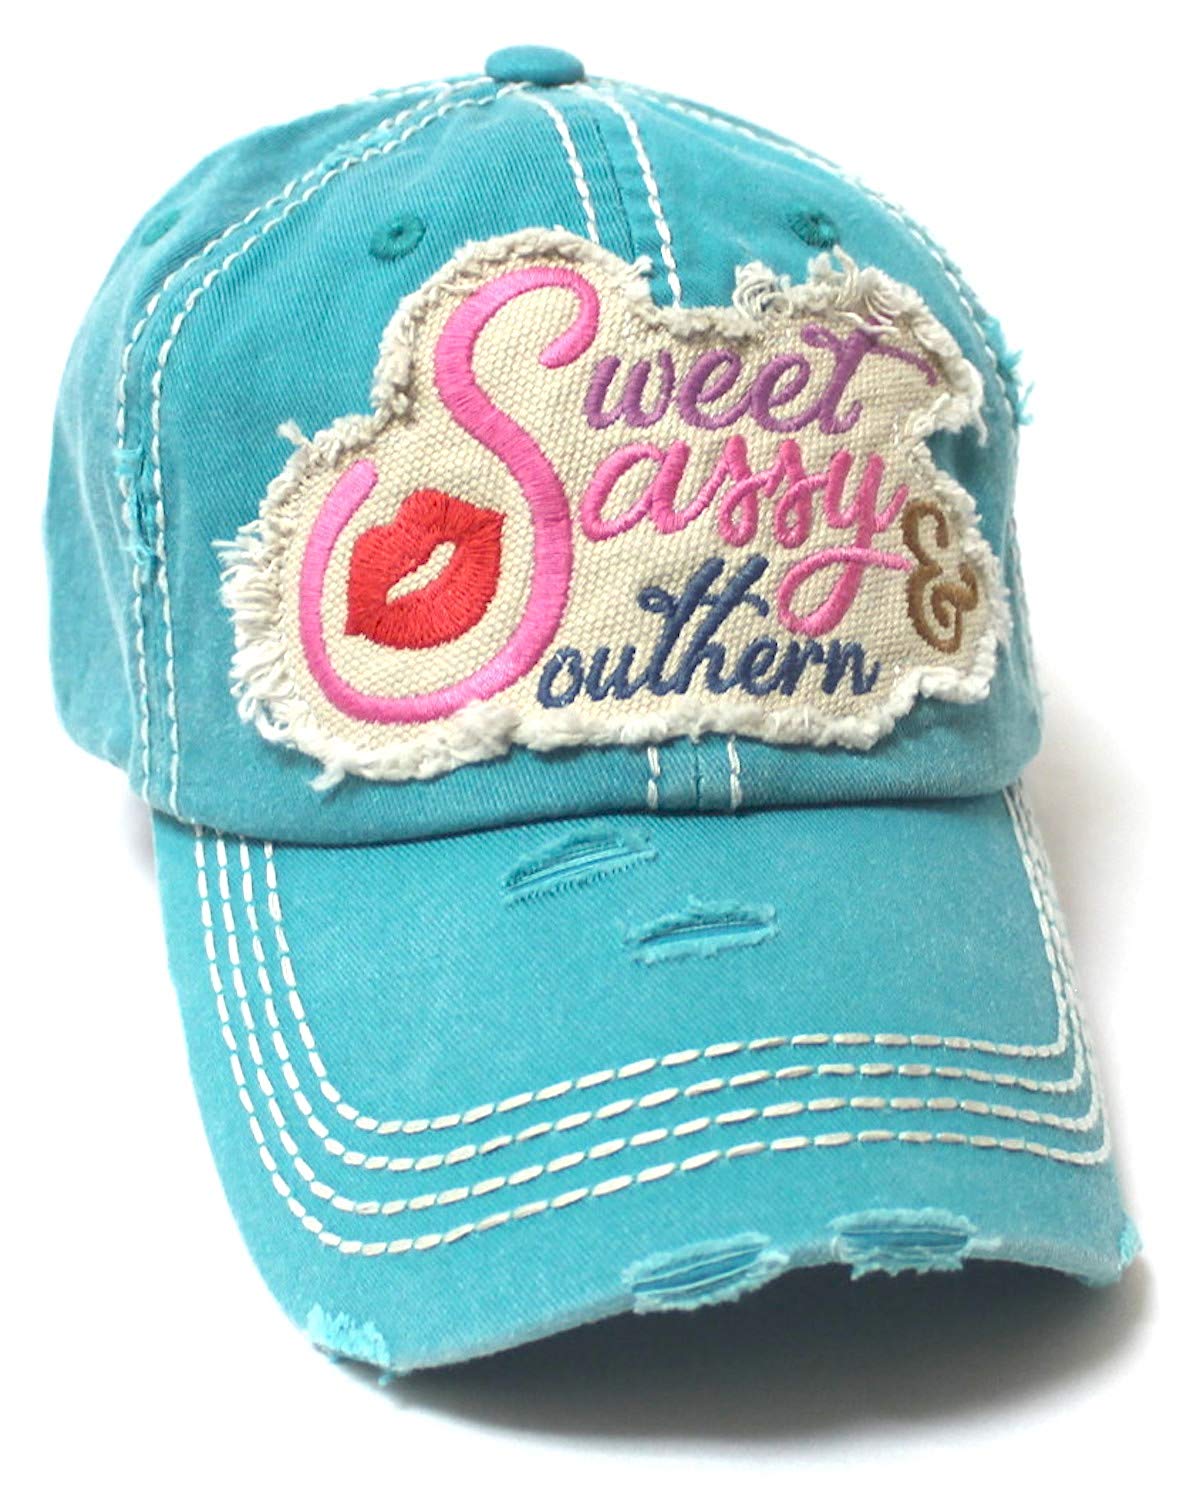 Women's Baseball Cap Sweet, Sassy & Southern Patch Embroidery Hat w/Red Kissy Lip Monogram, Turuoise - Caps 'N Vintage 